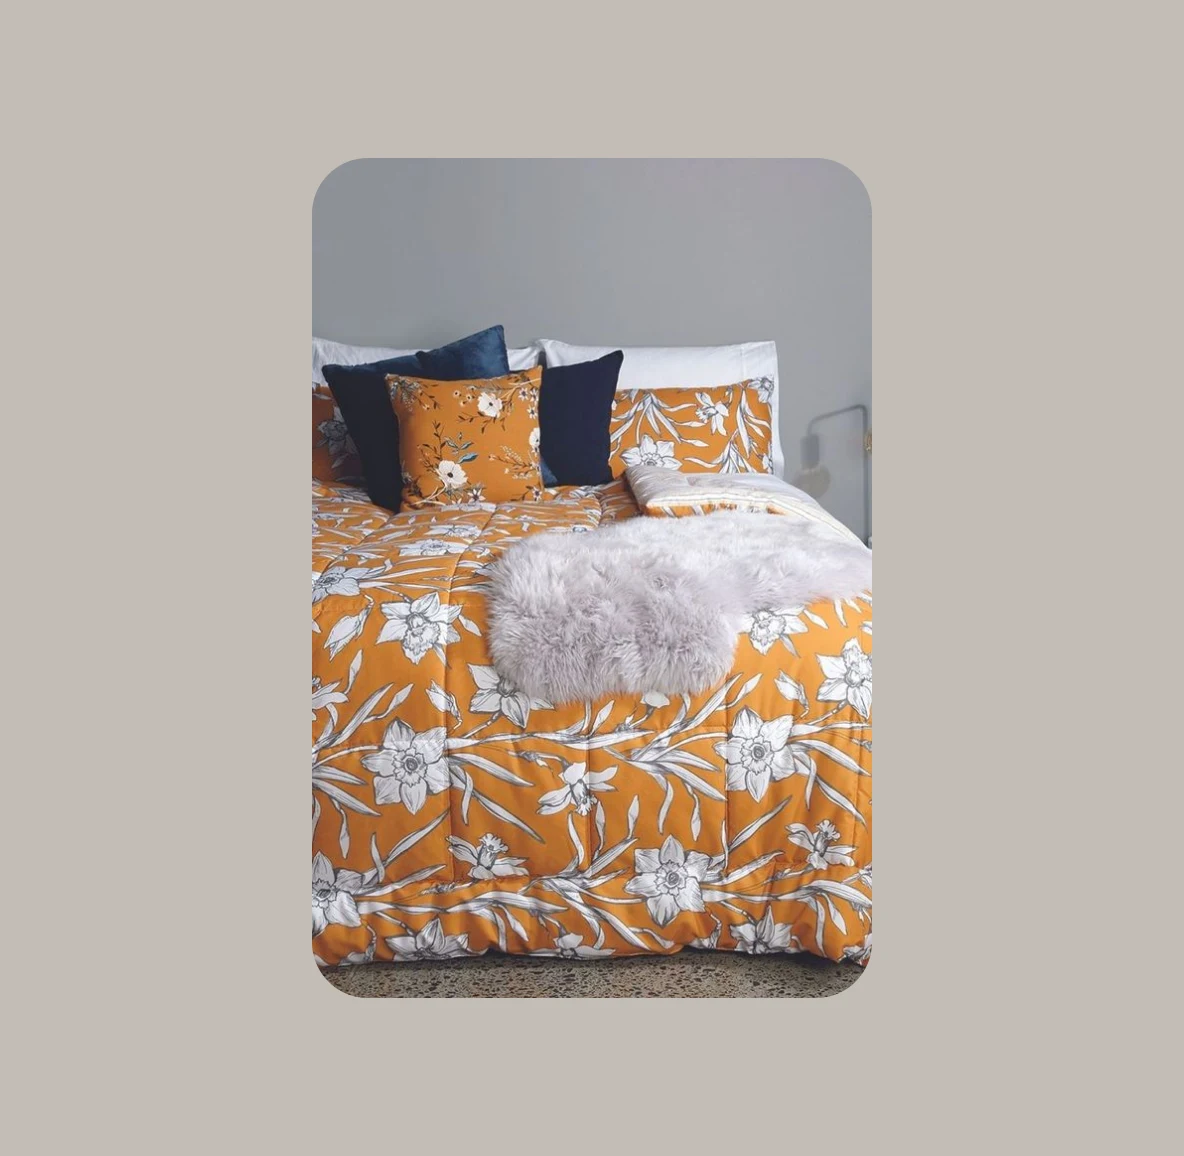 Pictured is a bed with a patterned comforter. The comforter is a mix of orange, navy and white colors with a shag white blanket laid on top of the bed. 